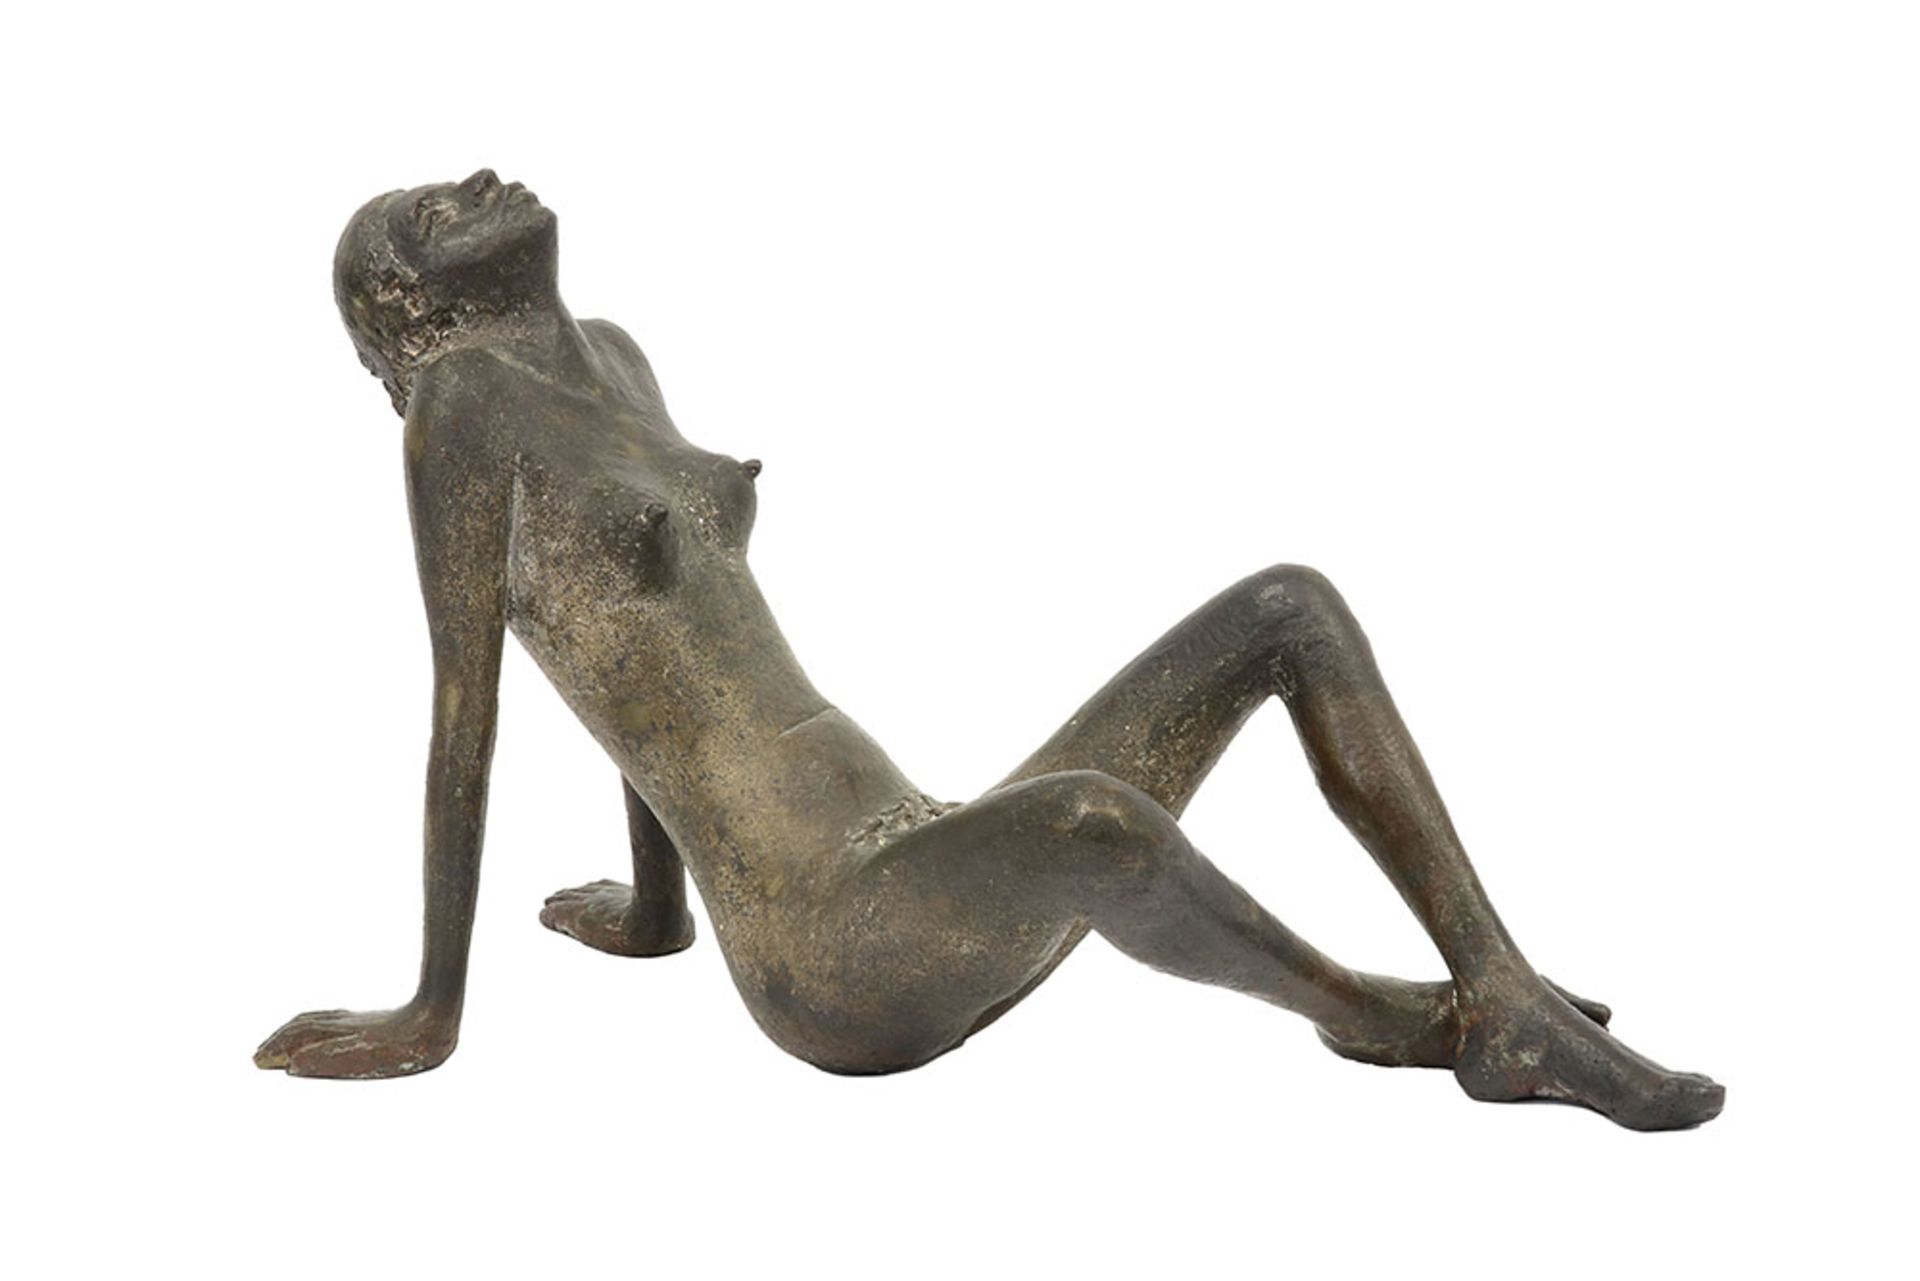 20th Cent. Belgian sculpture in bronze - signed Georges Grard || GRARD GEORGES (1901 - 1984)